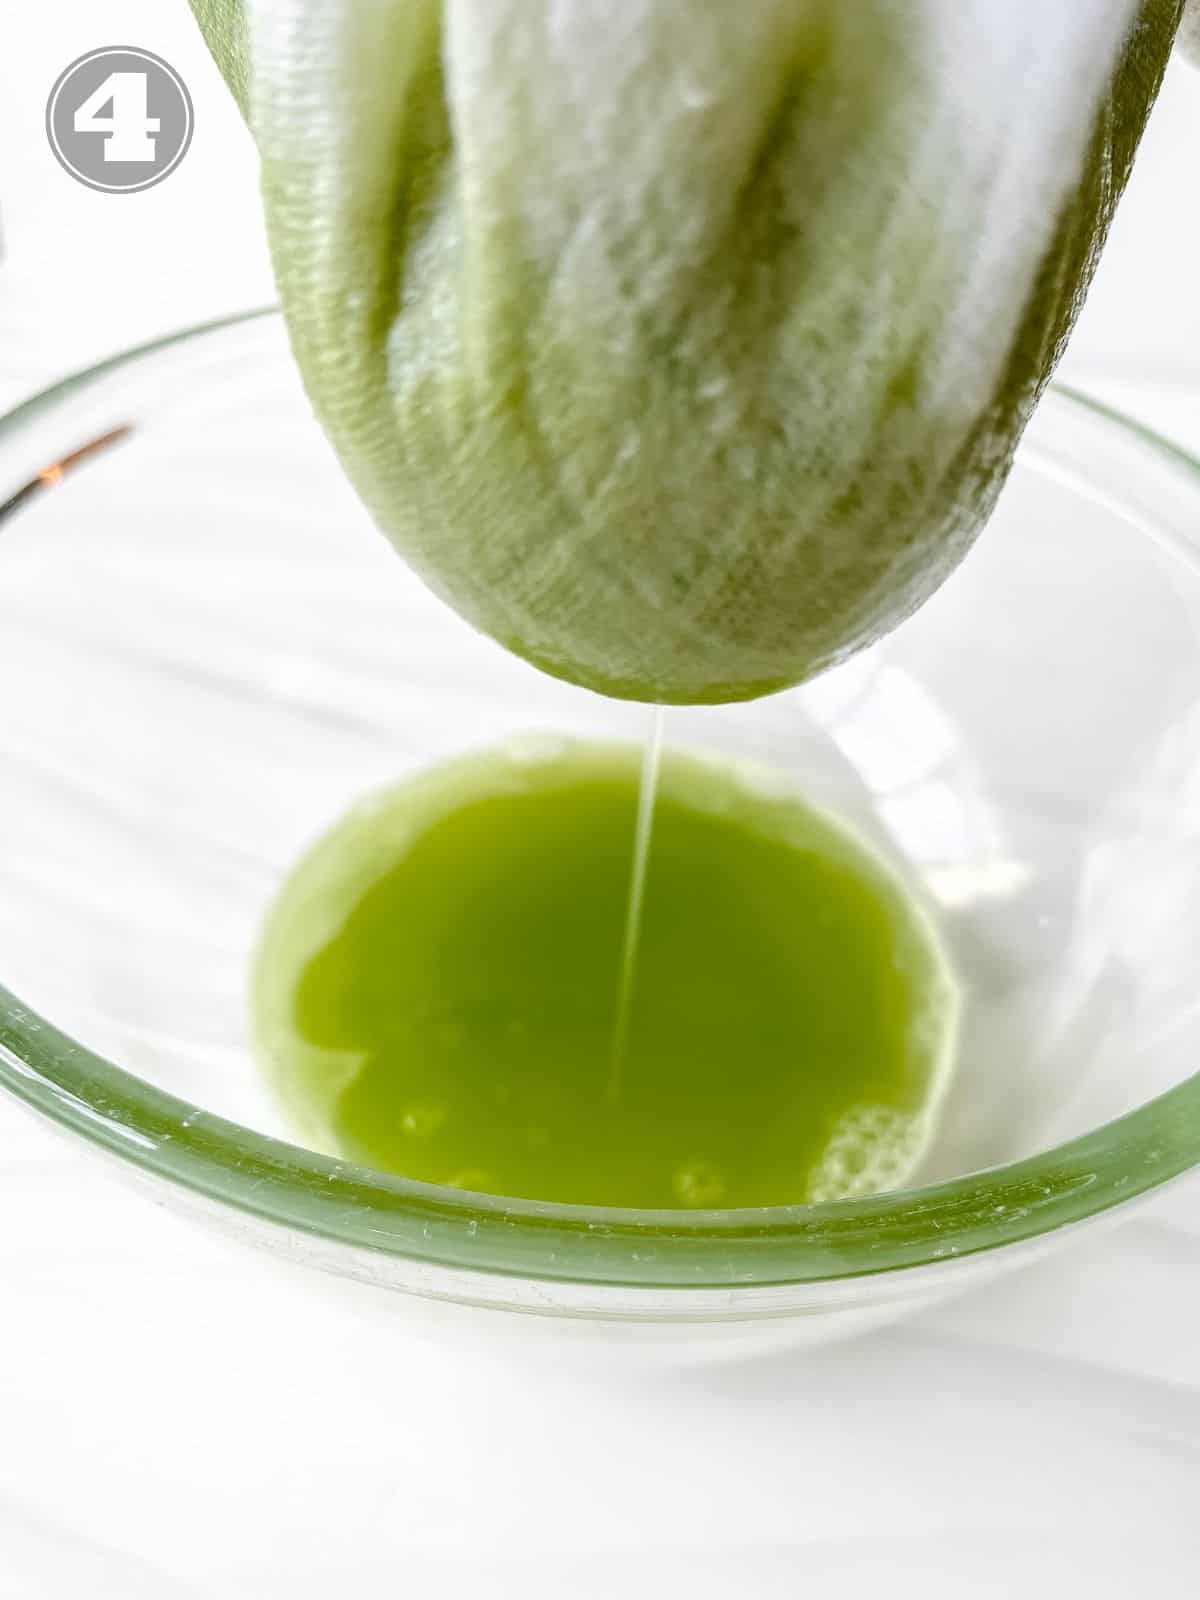 celery cucumber juice being squeezed out of a white cloth into a glass bowl labelled number four.